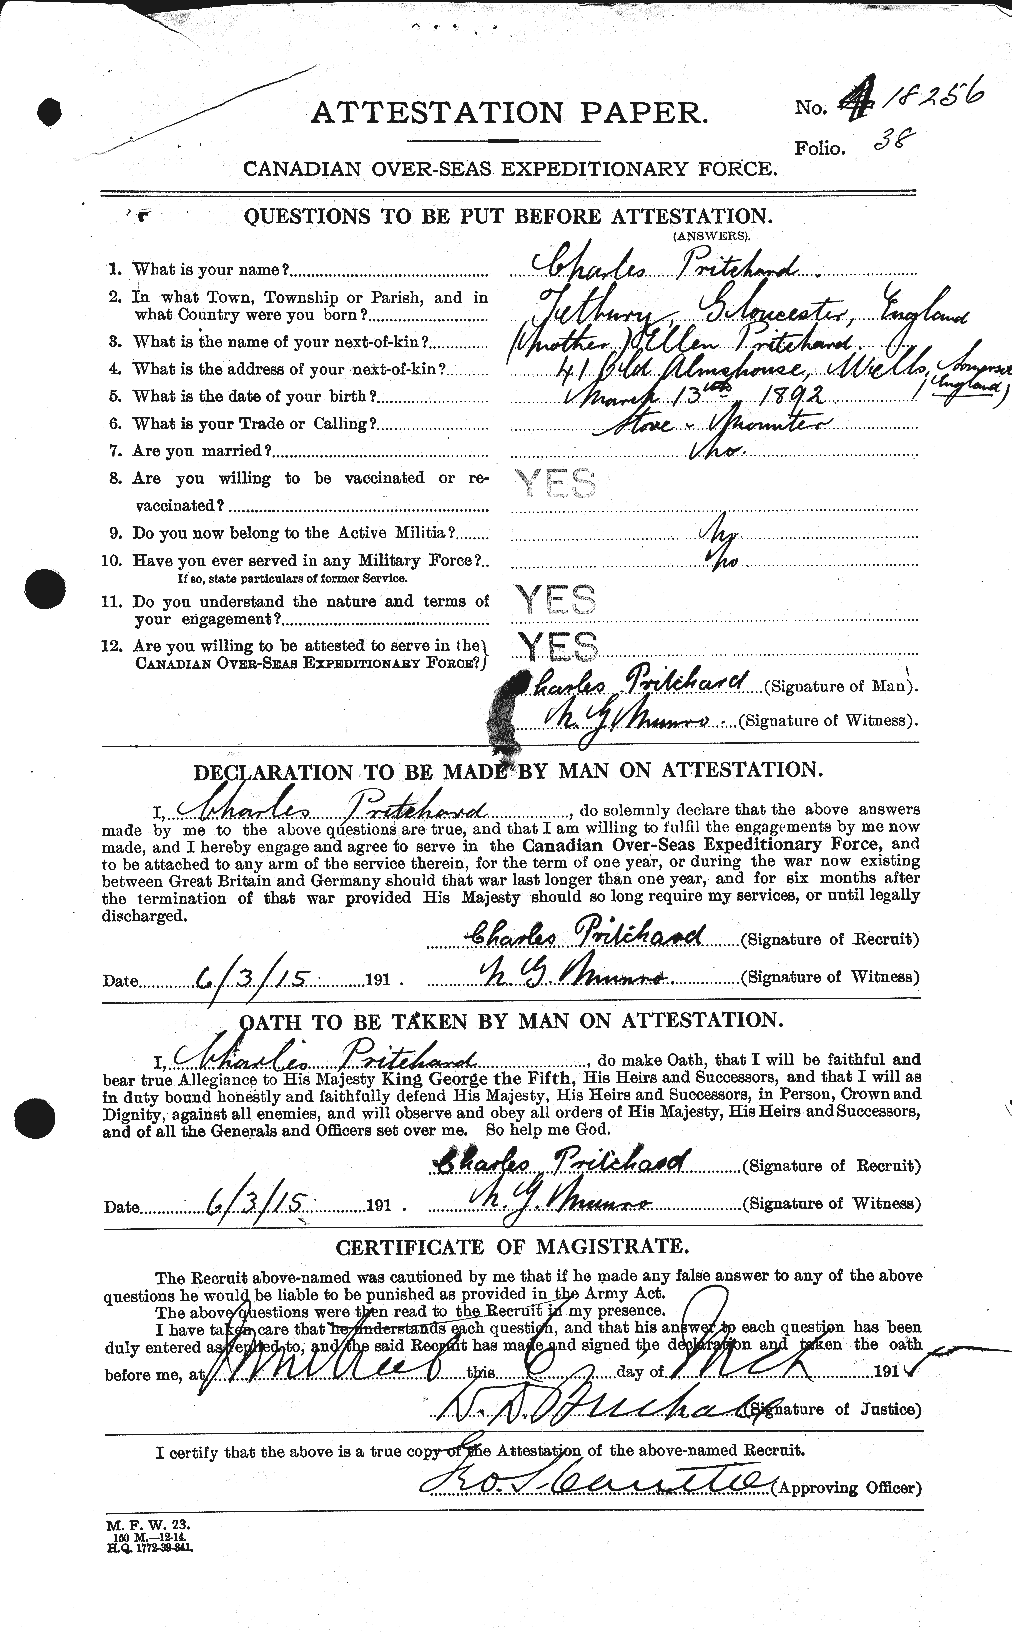 Personnel Records of the First World War - CEF 588492a